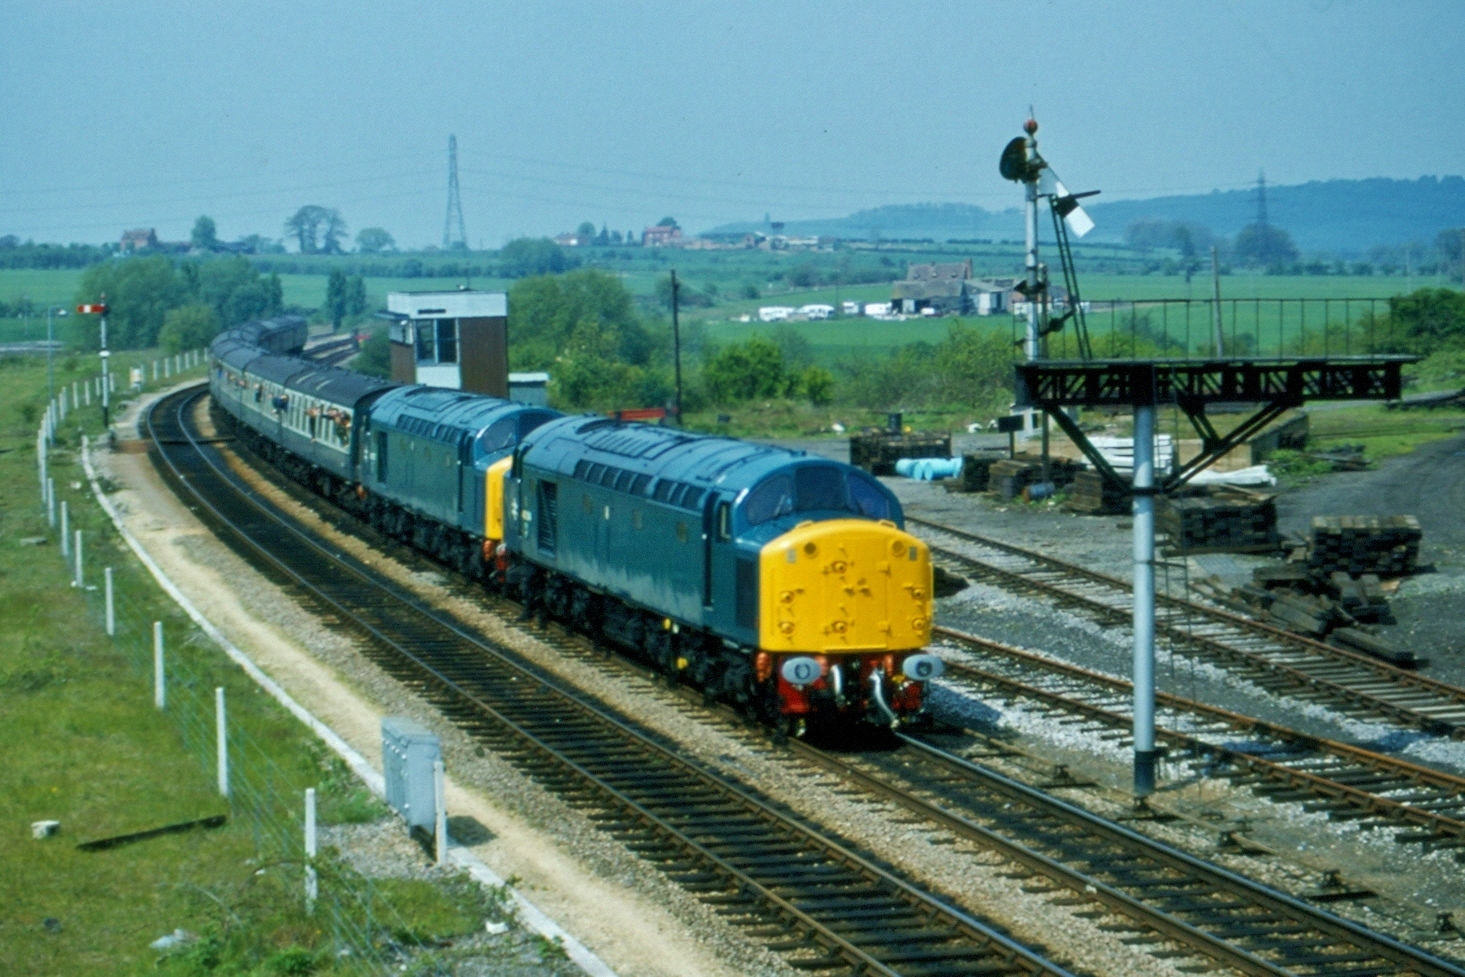 Nos.40057 and 40084 at Evesham